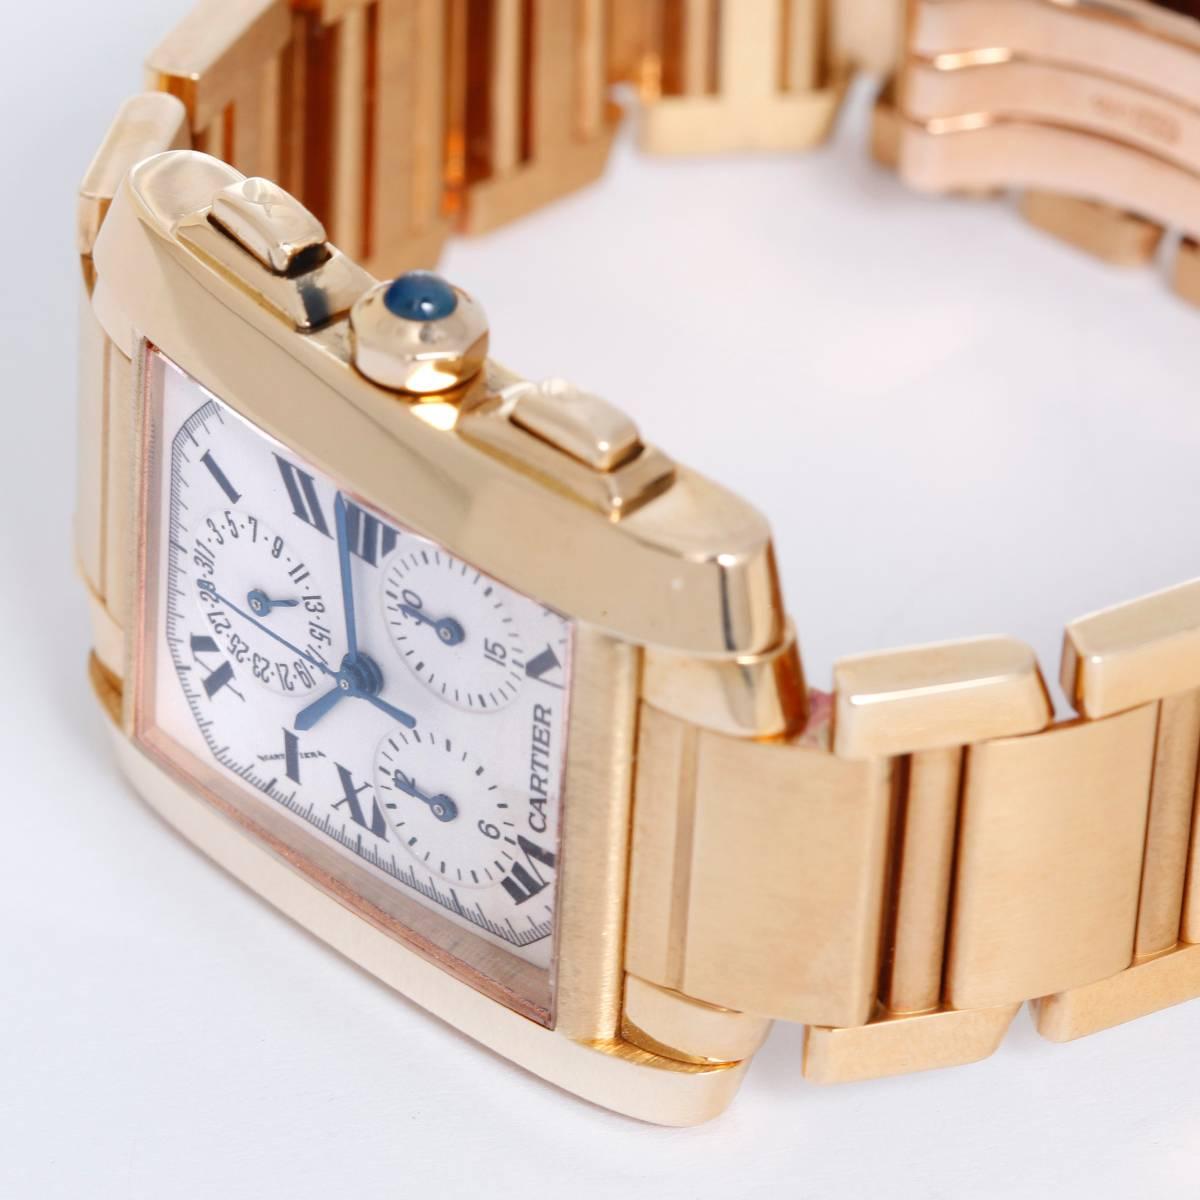 Quartz. 18k yellow gold rectangular style case (28mm x 32mm). White dial with black Roman numerals. 18k yellow gold Cartier bracelet. Pre-owned with Cartier box. W5000R2   Retail Price: $26,400.00